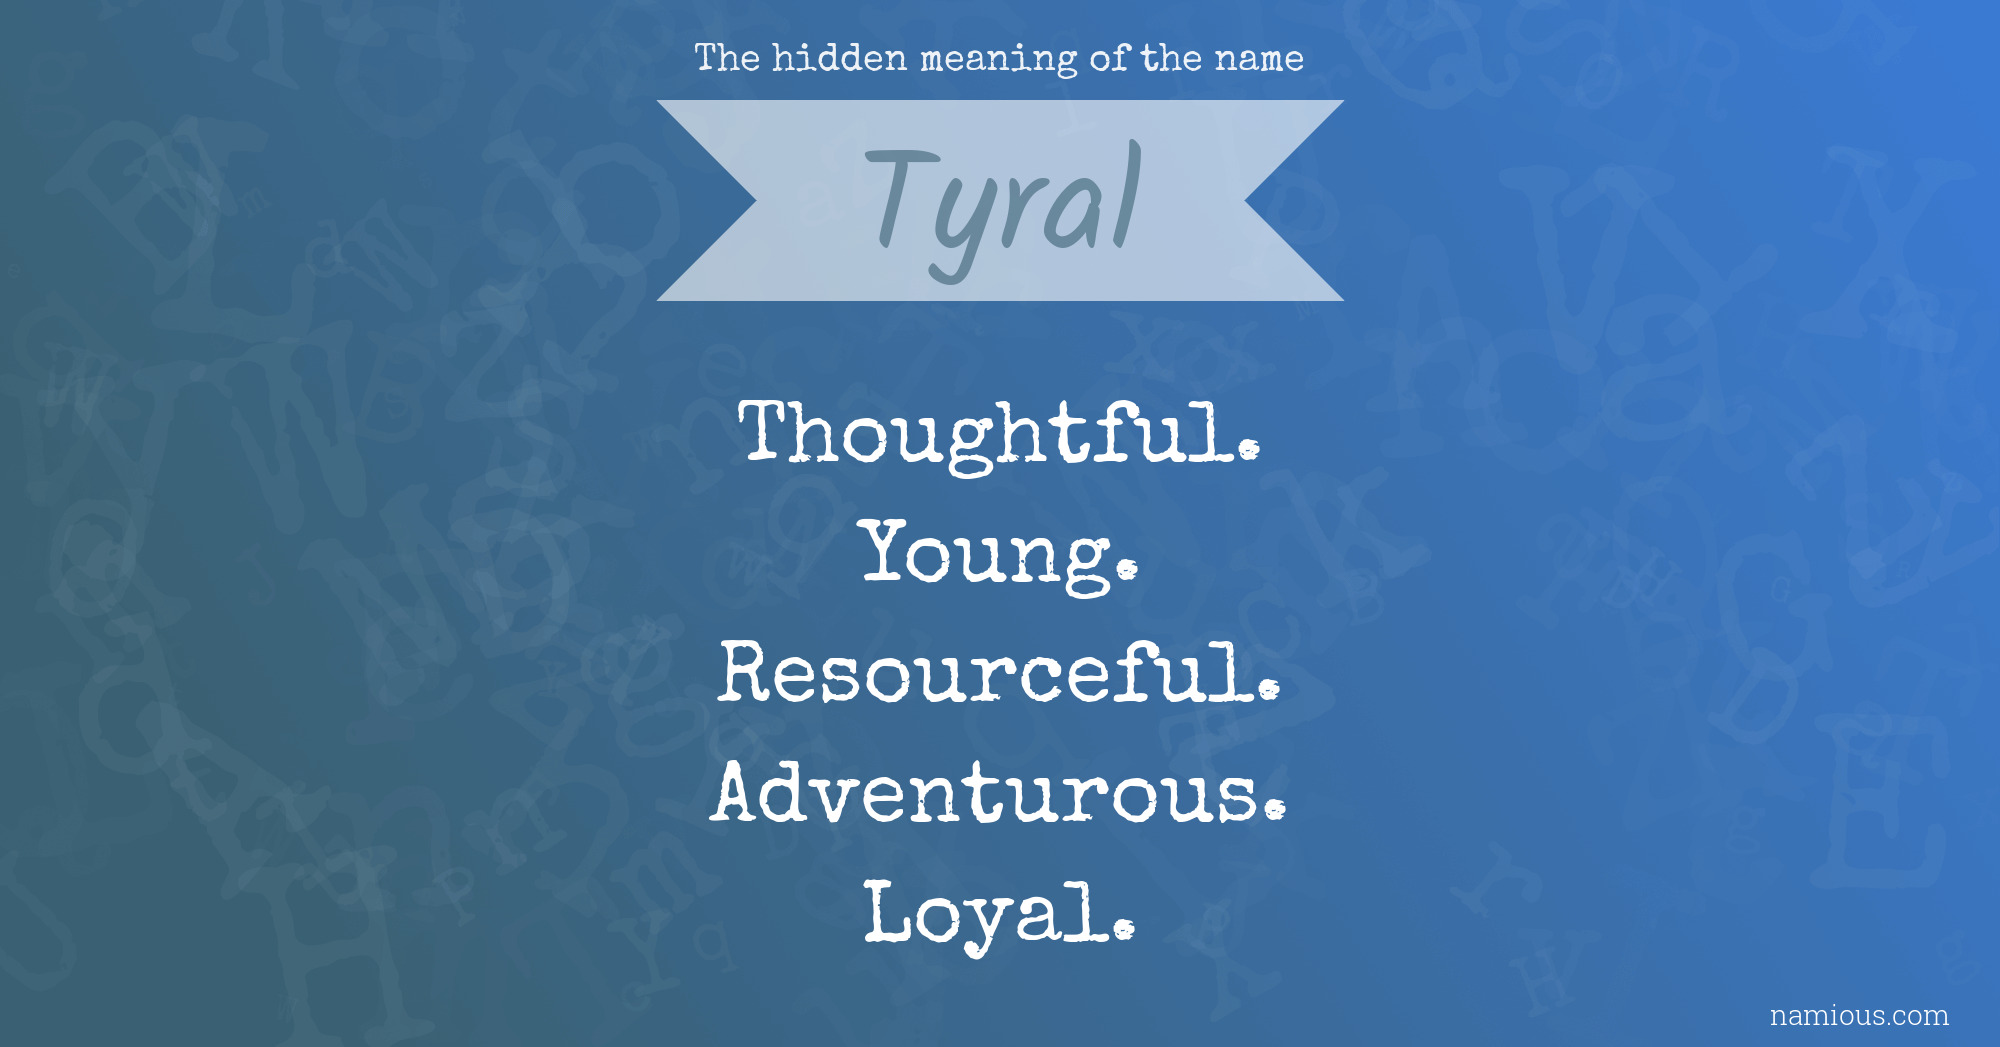 The hidden meaning of the name Tyral